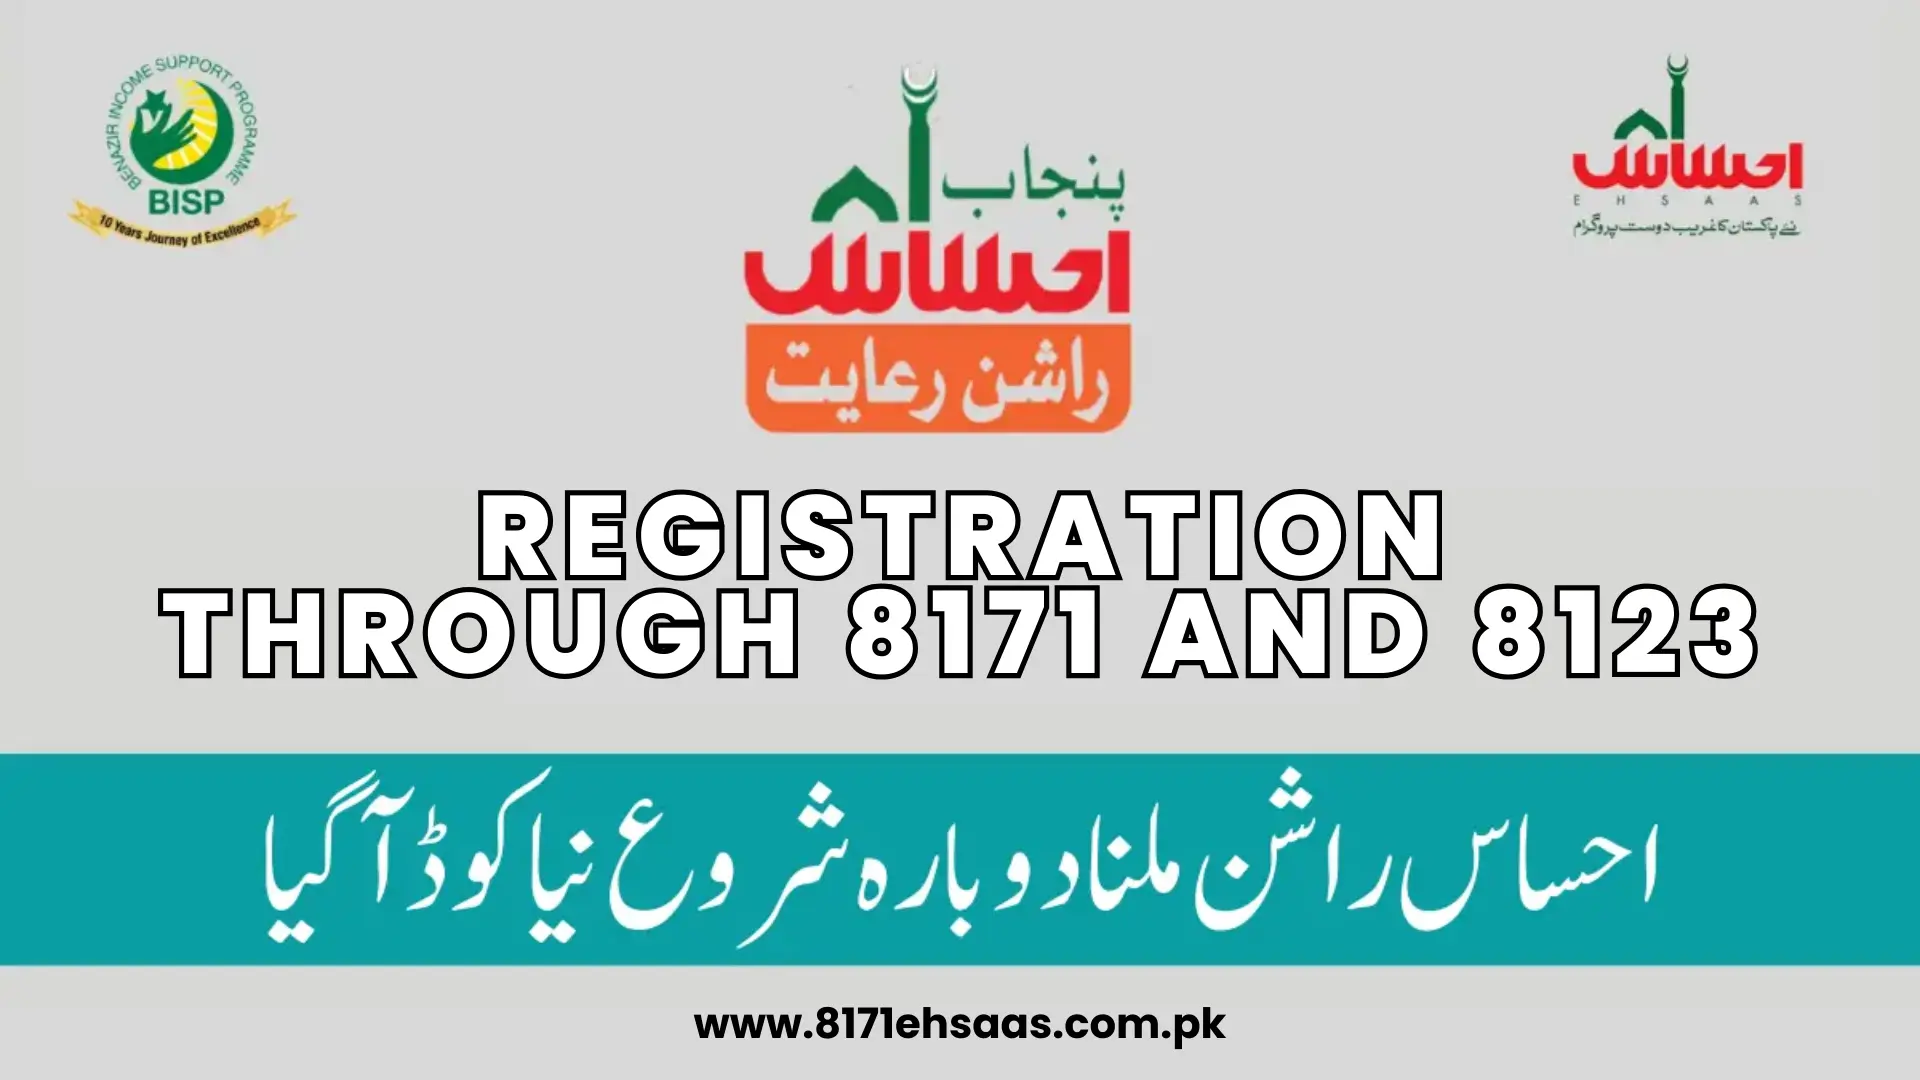 Registration Through 8171 and 8123